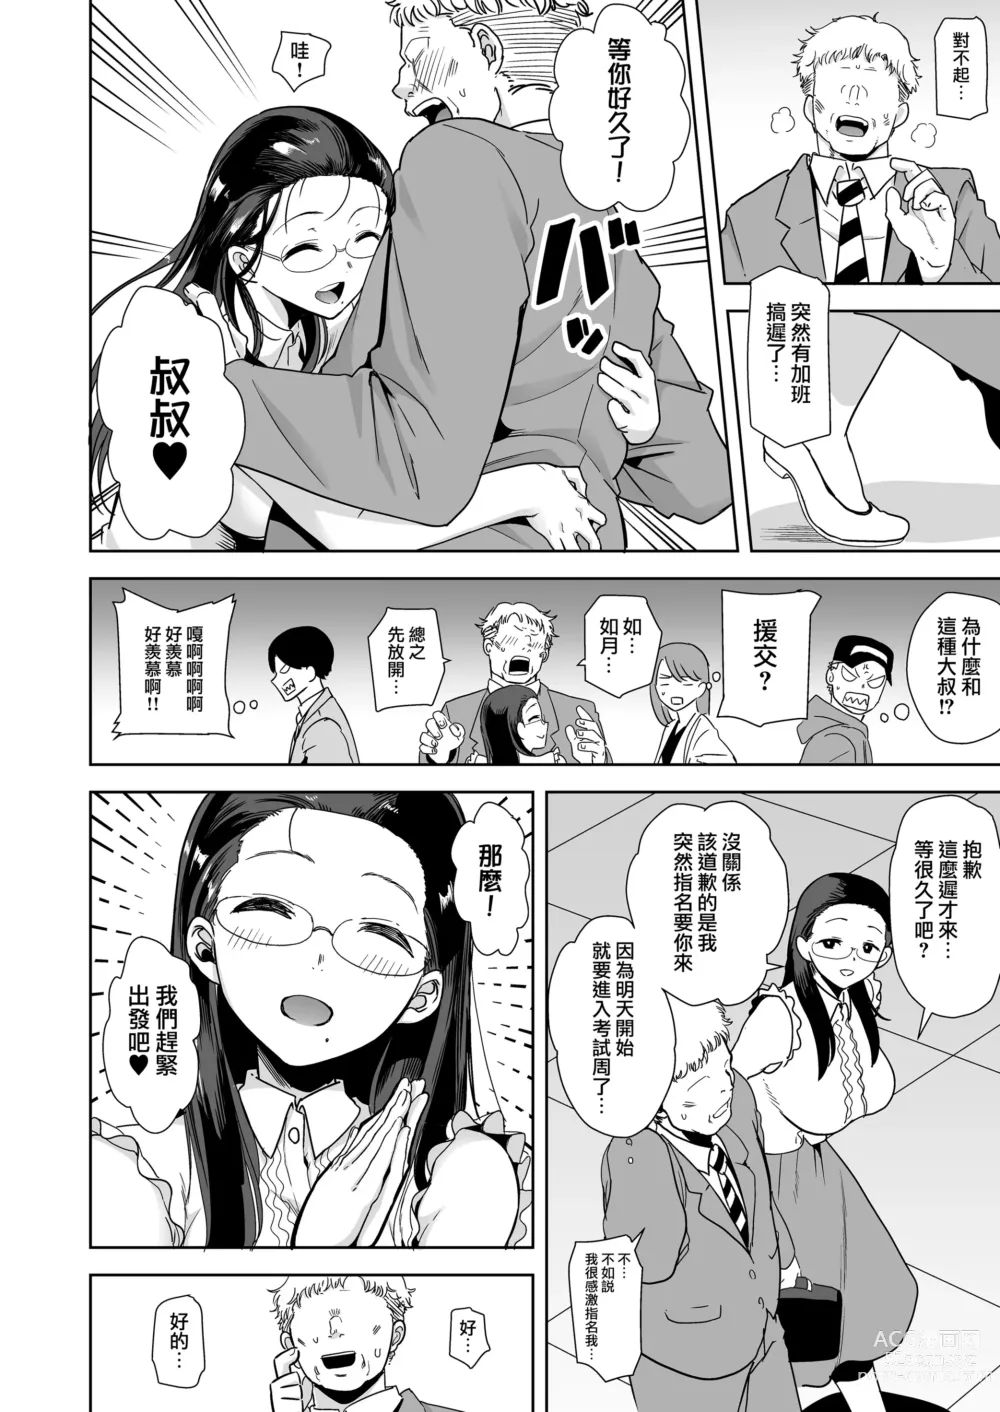 Page 5 of doujinshi 聖華女学院高等部公認竿おじさん1-6